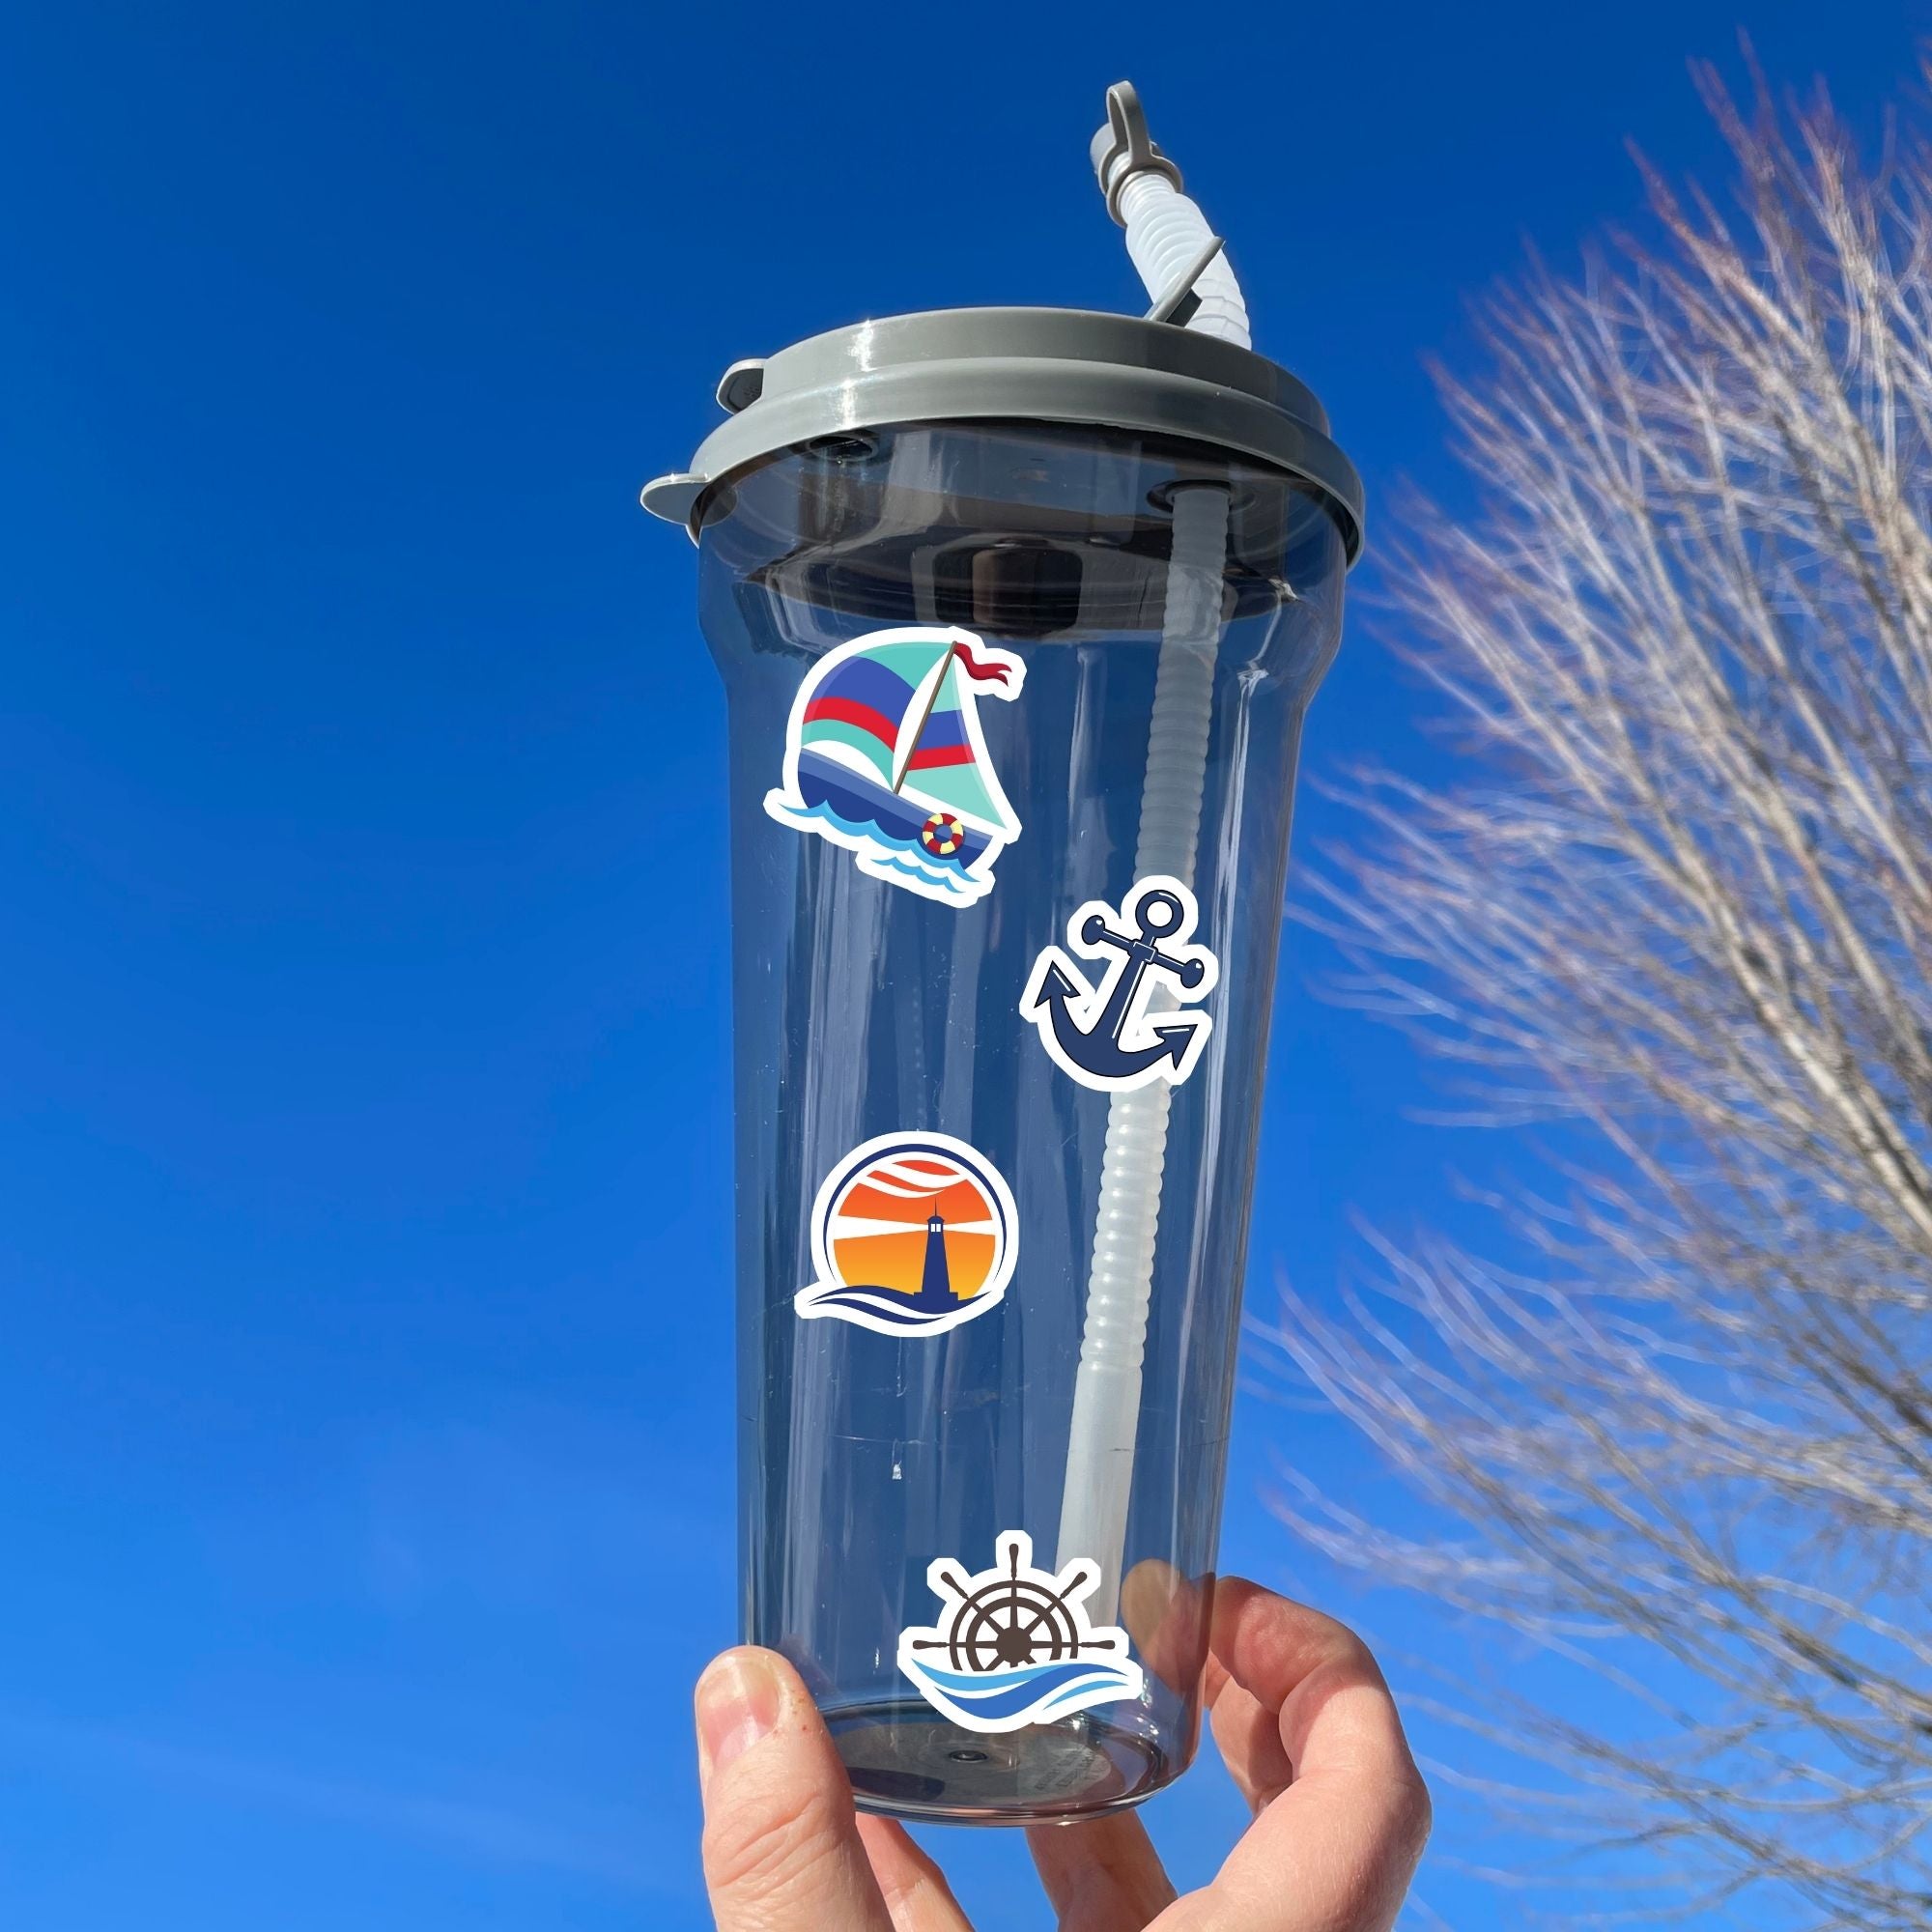 This image shows a water bottle with some of the Let's Sail Away stickers applied.